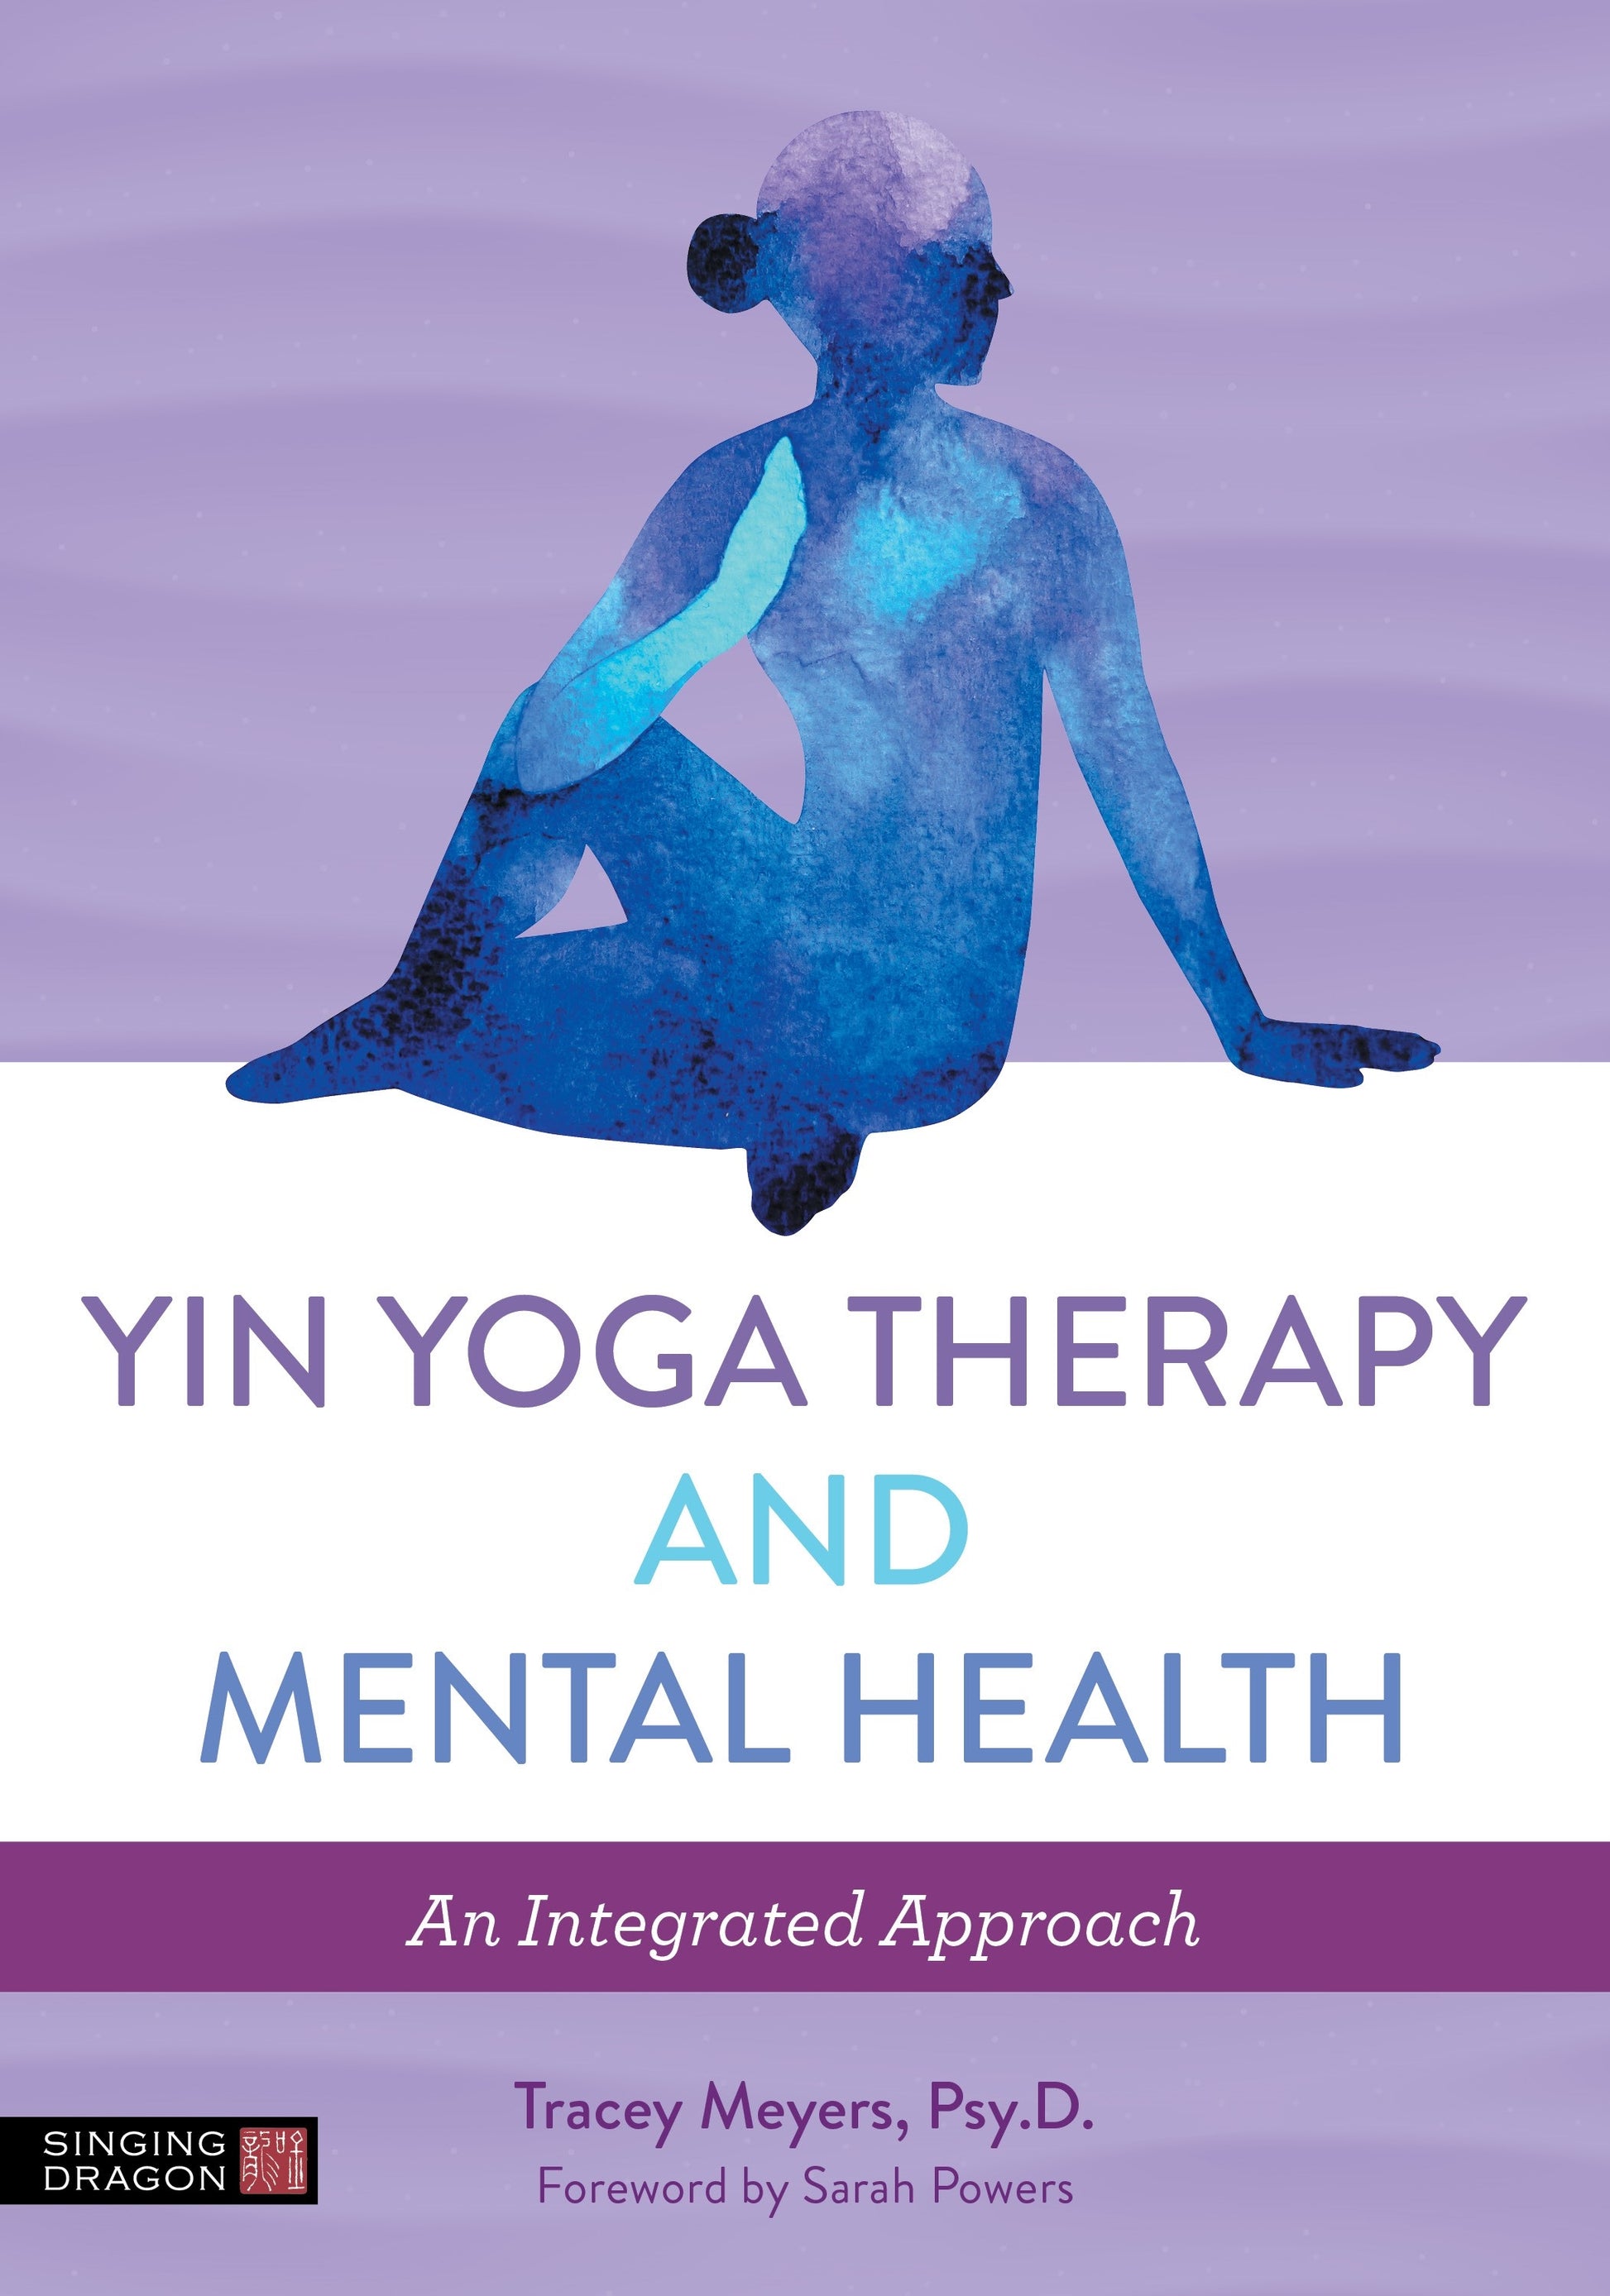 Yin Yoga Therapy and Mental Health by Tracey Meyers, Sarah Powers